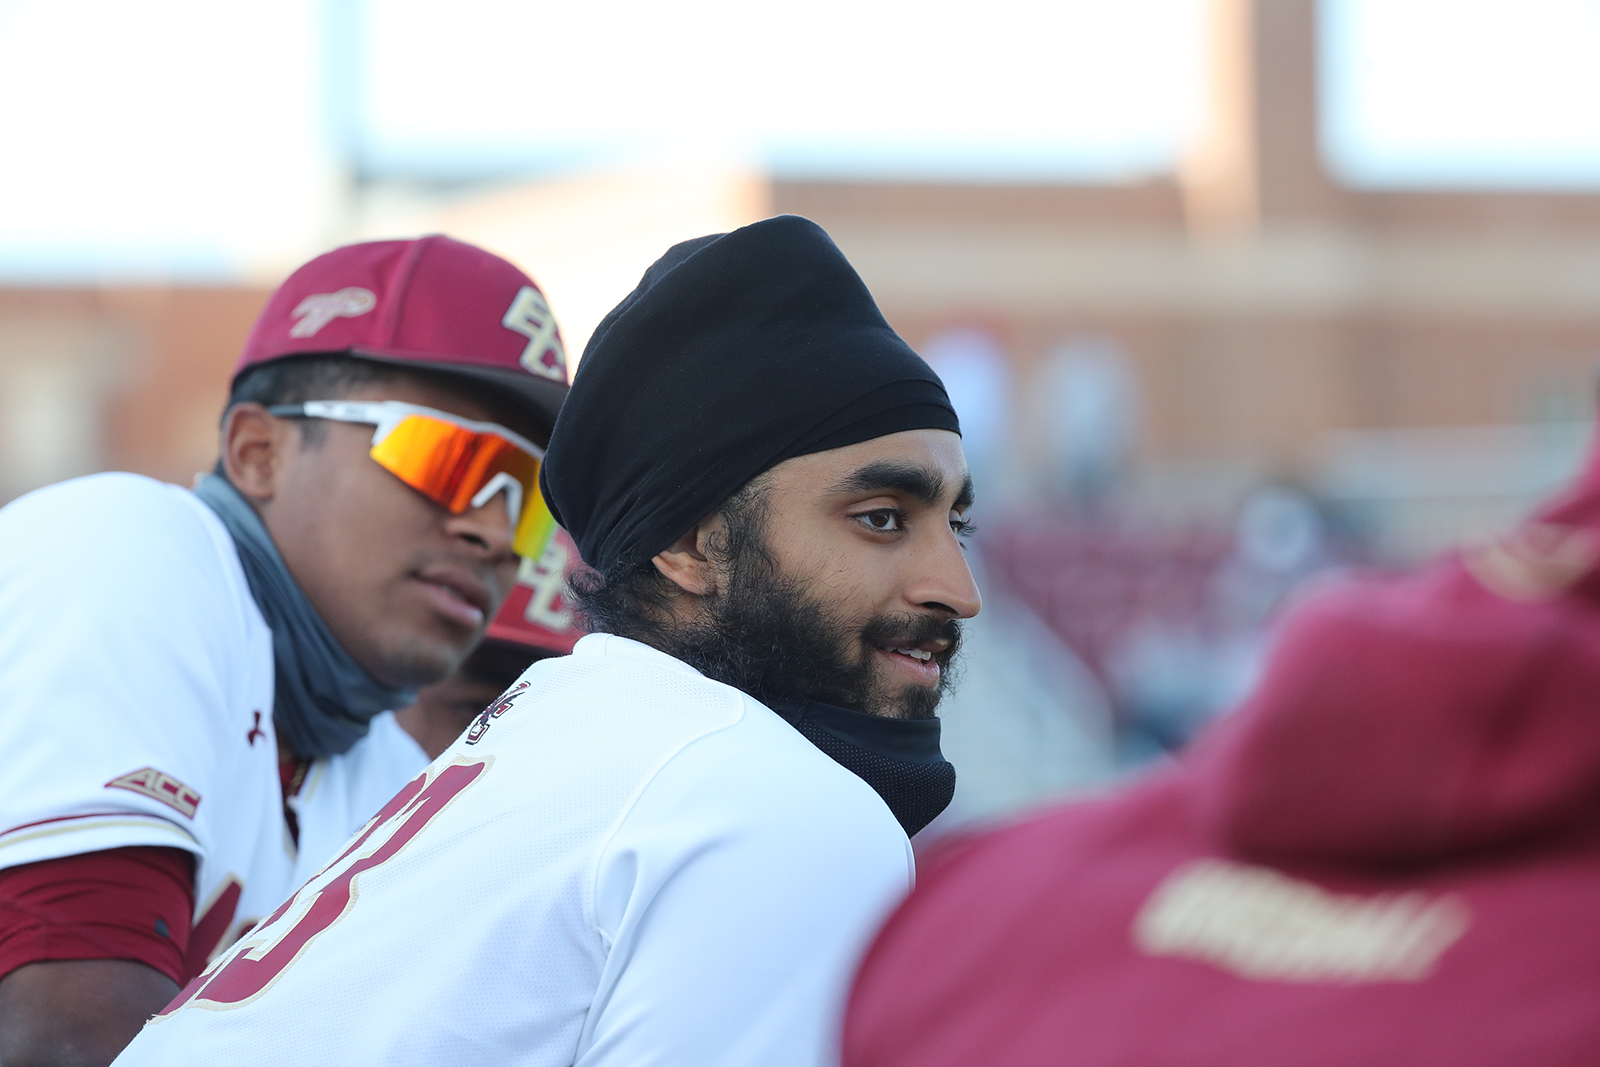 Boston College senior Samrath Singh, center, talks with teammates in the dugout during a game in April 2021. Photo courtesy of Boston College Athletics